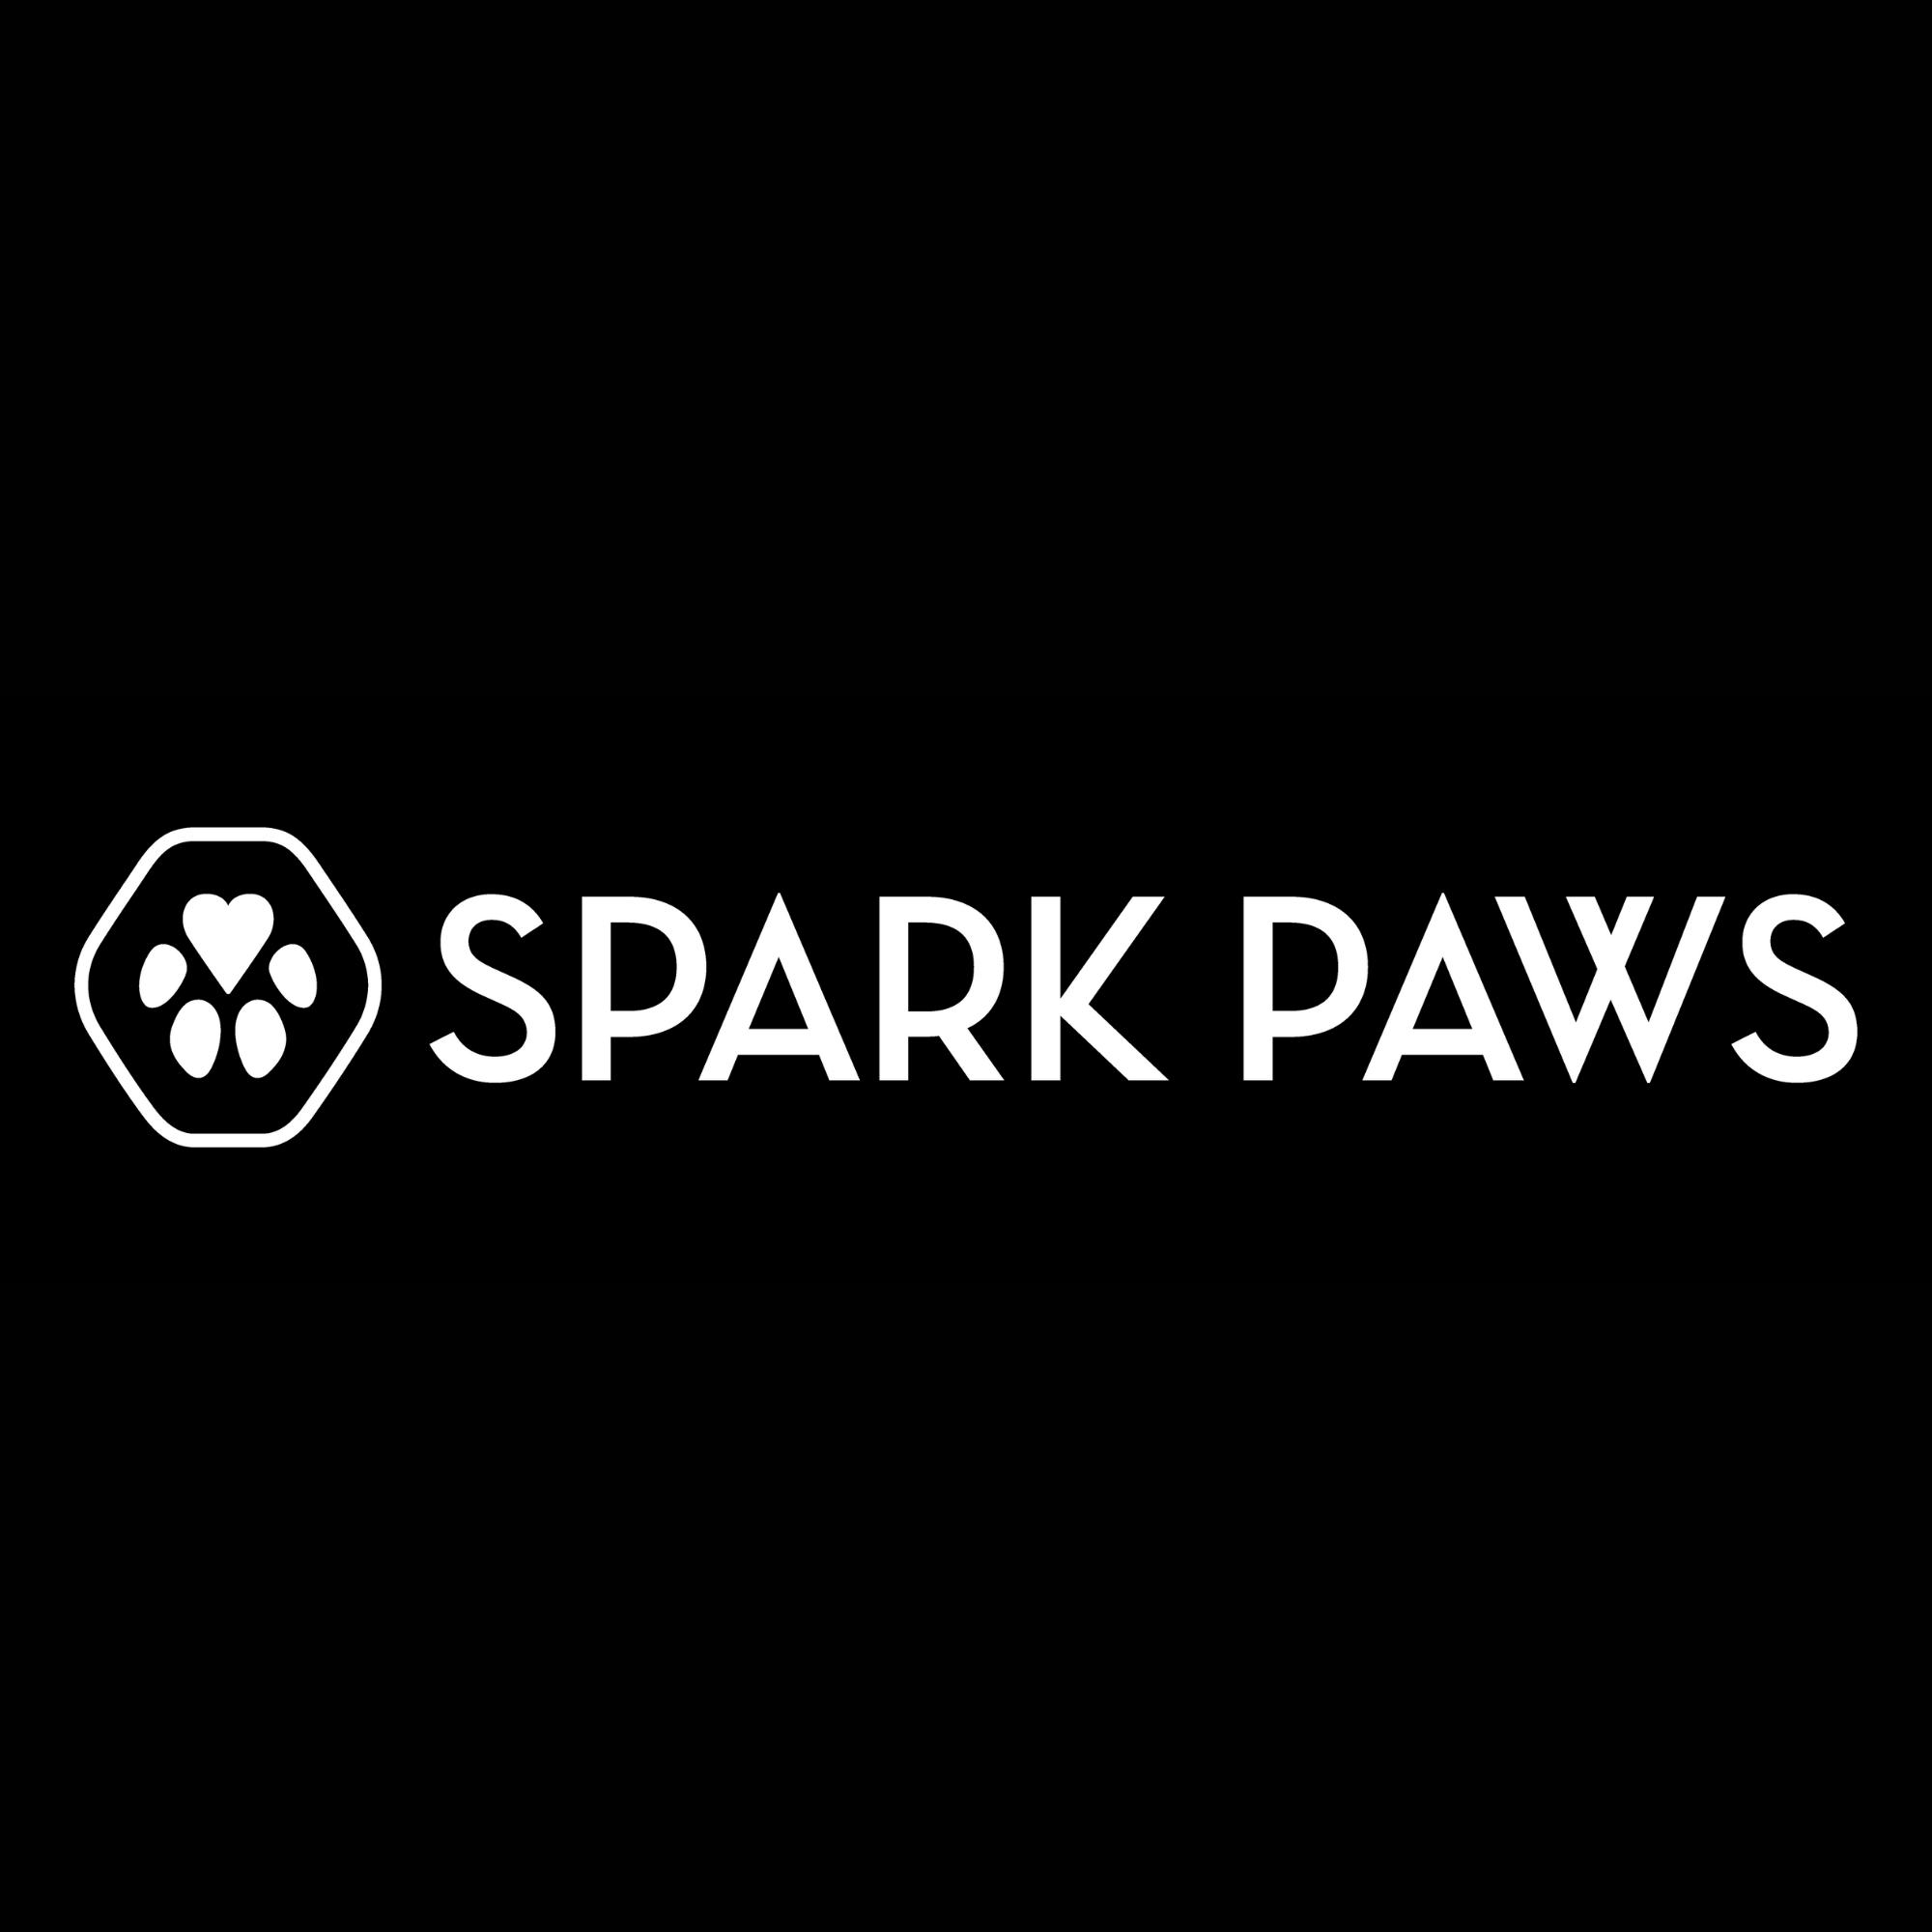 Spark paws coupon codes, promo codes and deals